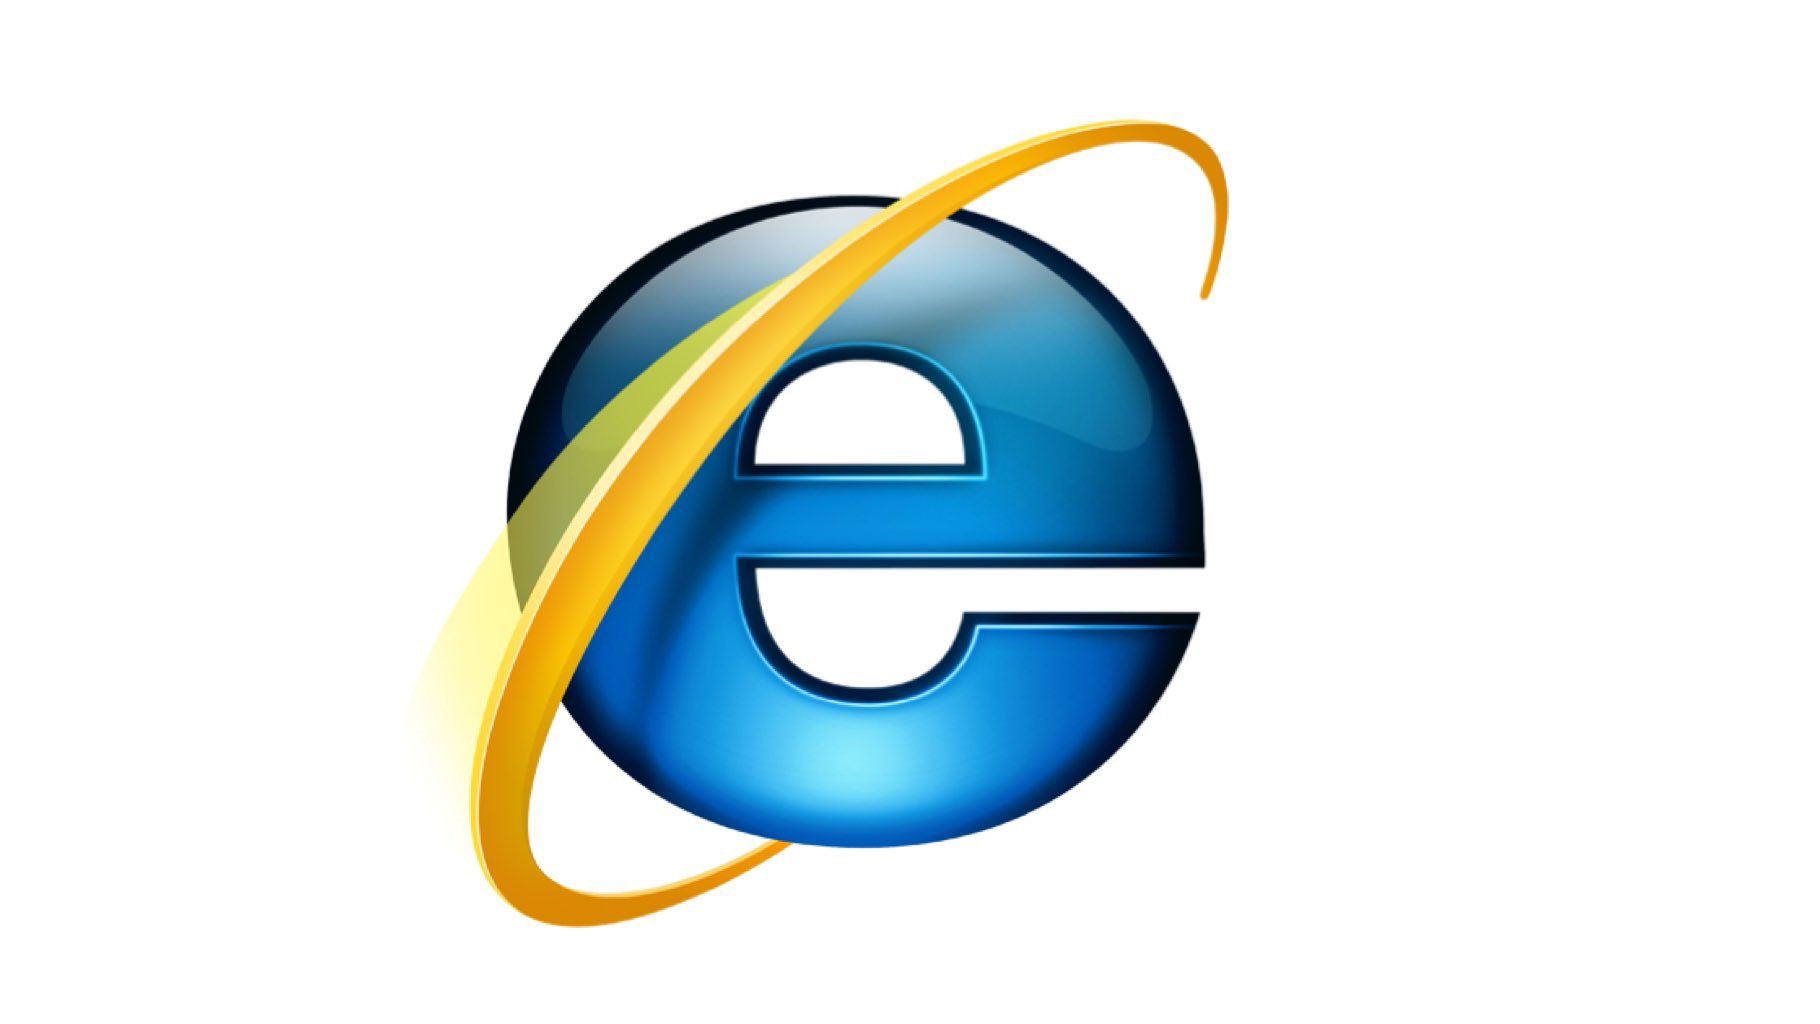 Microsoft’s Internet Explorer: A journey through the years